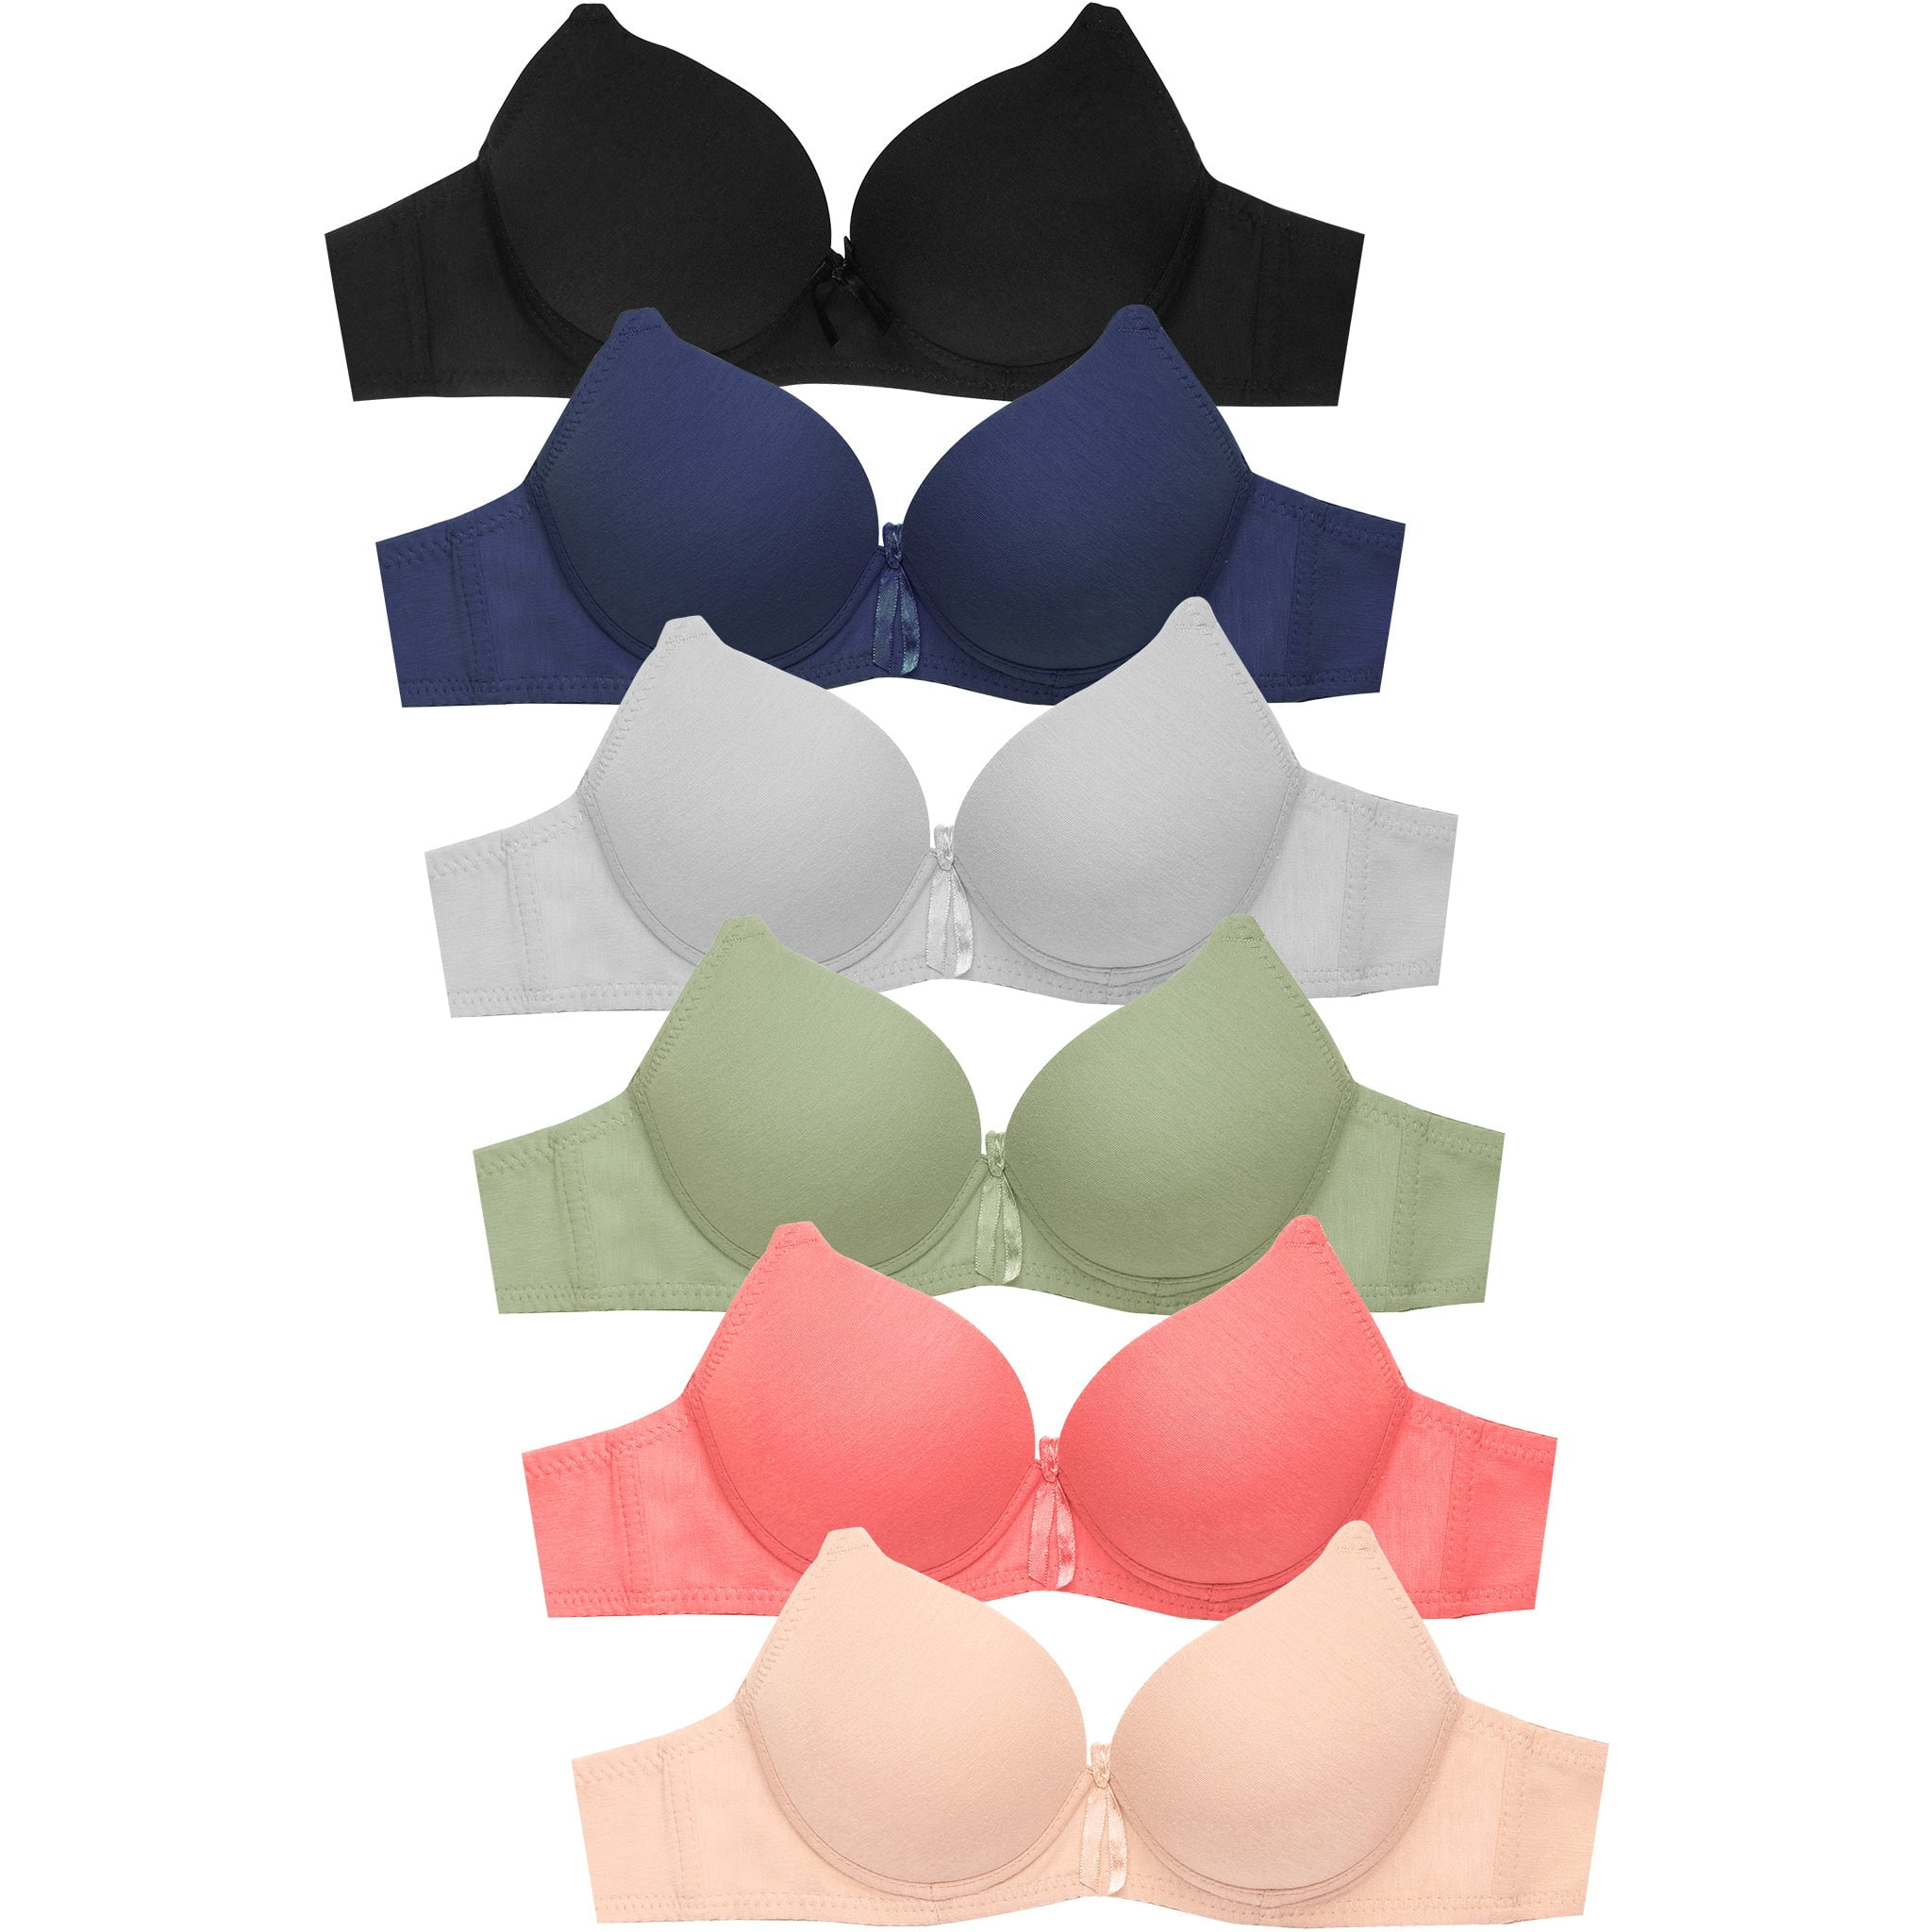 UNDERWIRE LACE Push Up Bra CUP SIZE 34-44 B C D NEW #99936 PACK OF 6 pcs BRAS 